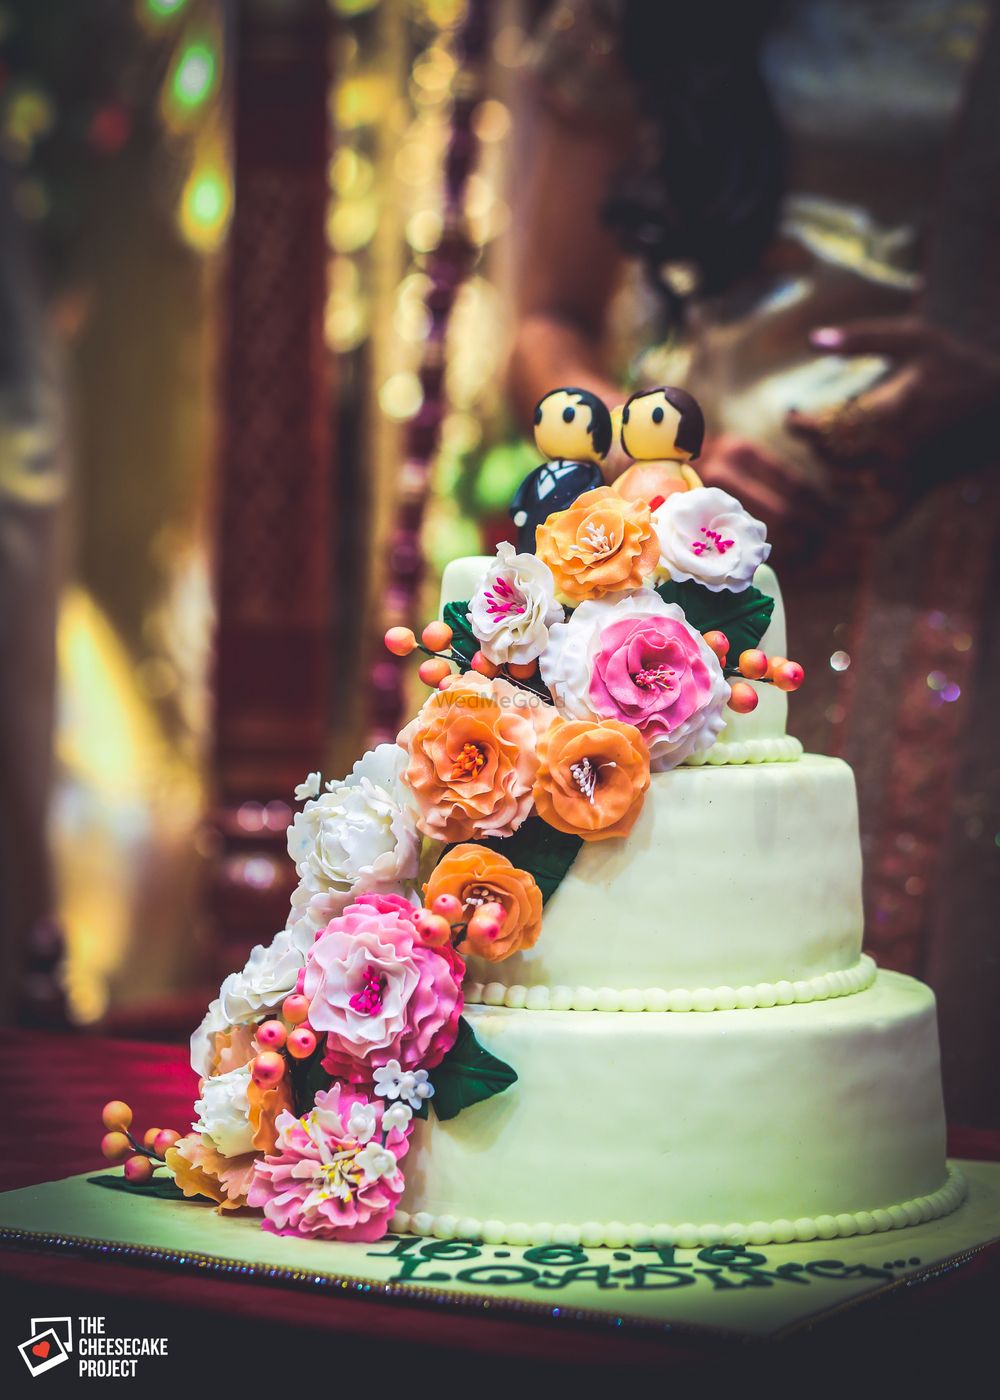 Photo of 3 Tier Wedding Cake with Couple Models and Floral Decor